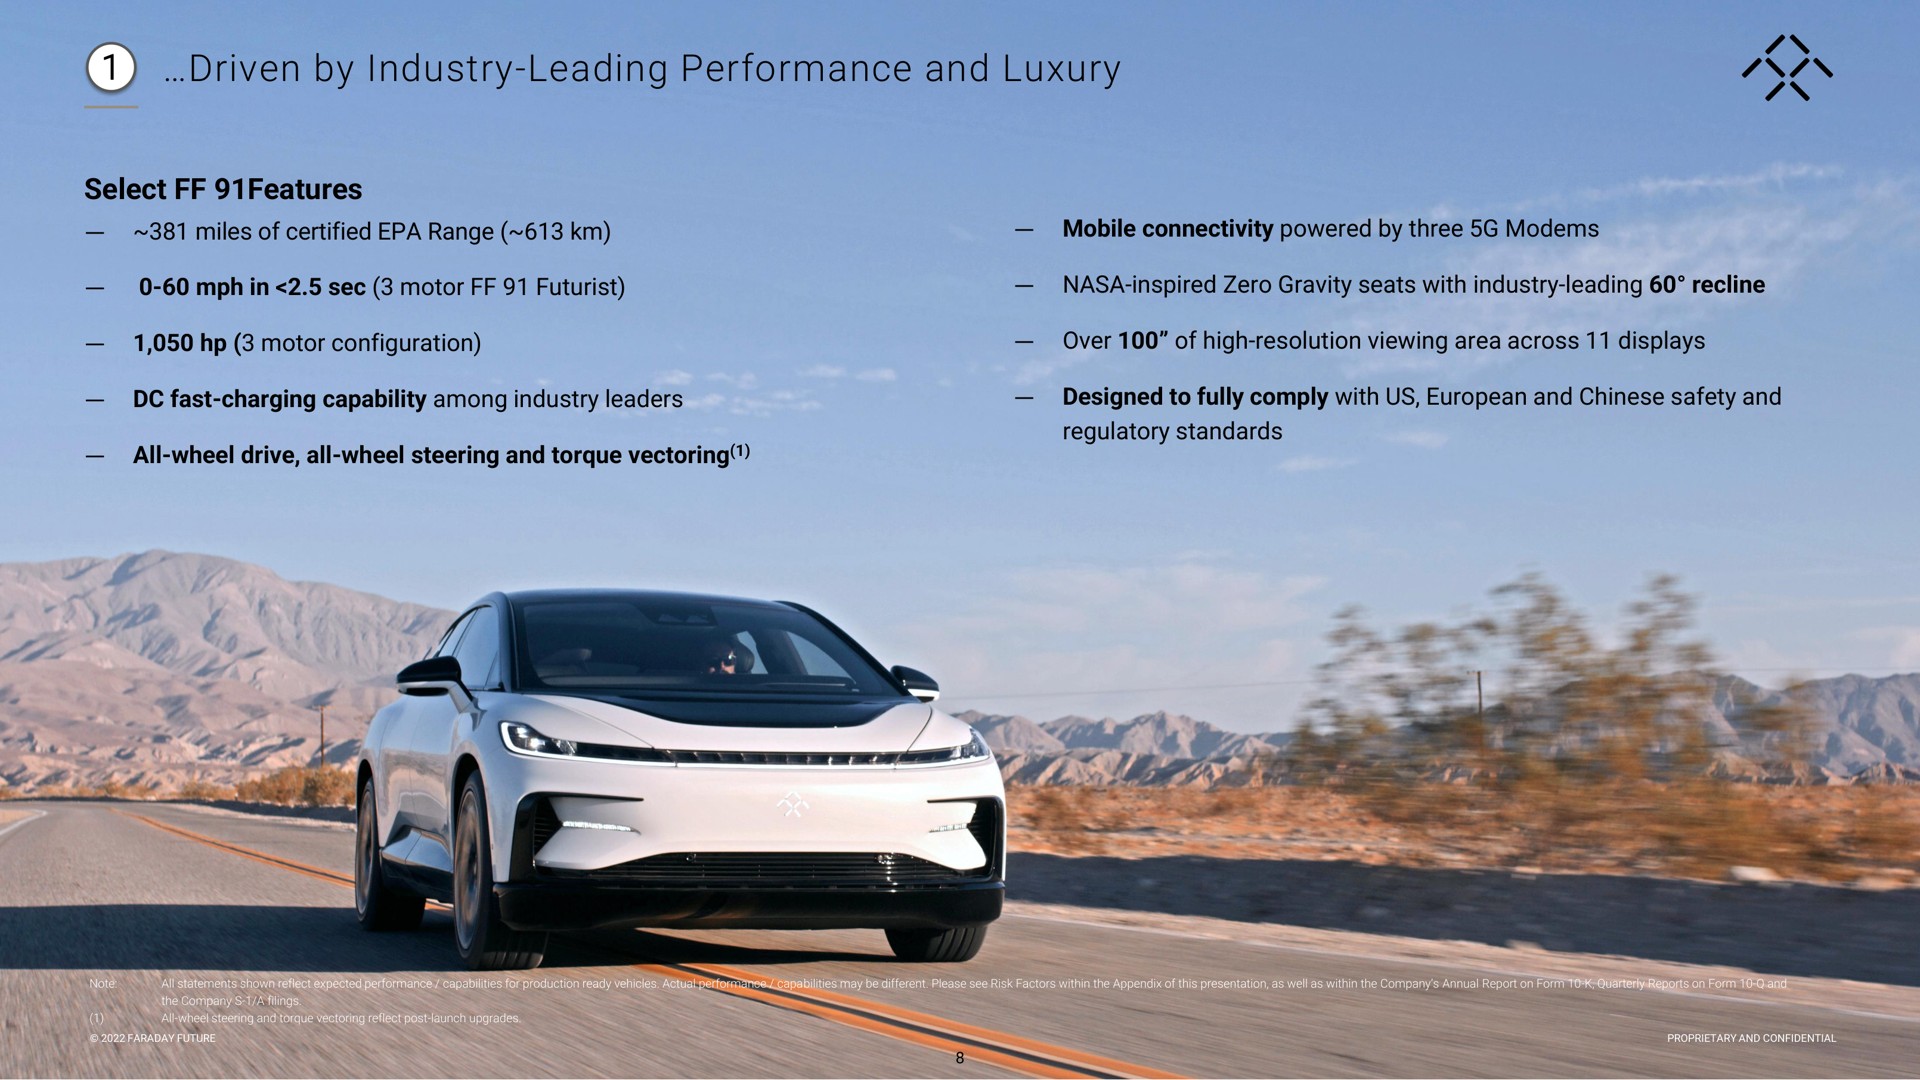 driven by industry leading performance and luxury select features opt dak i | Faraday Future